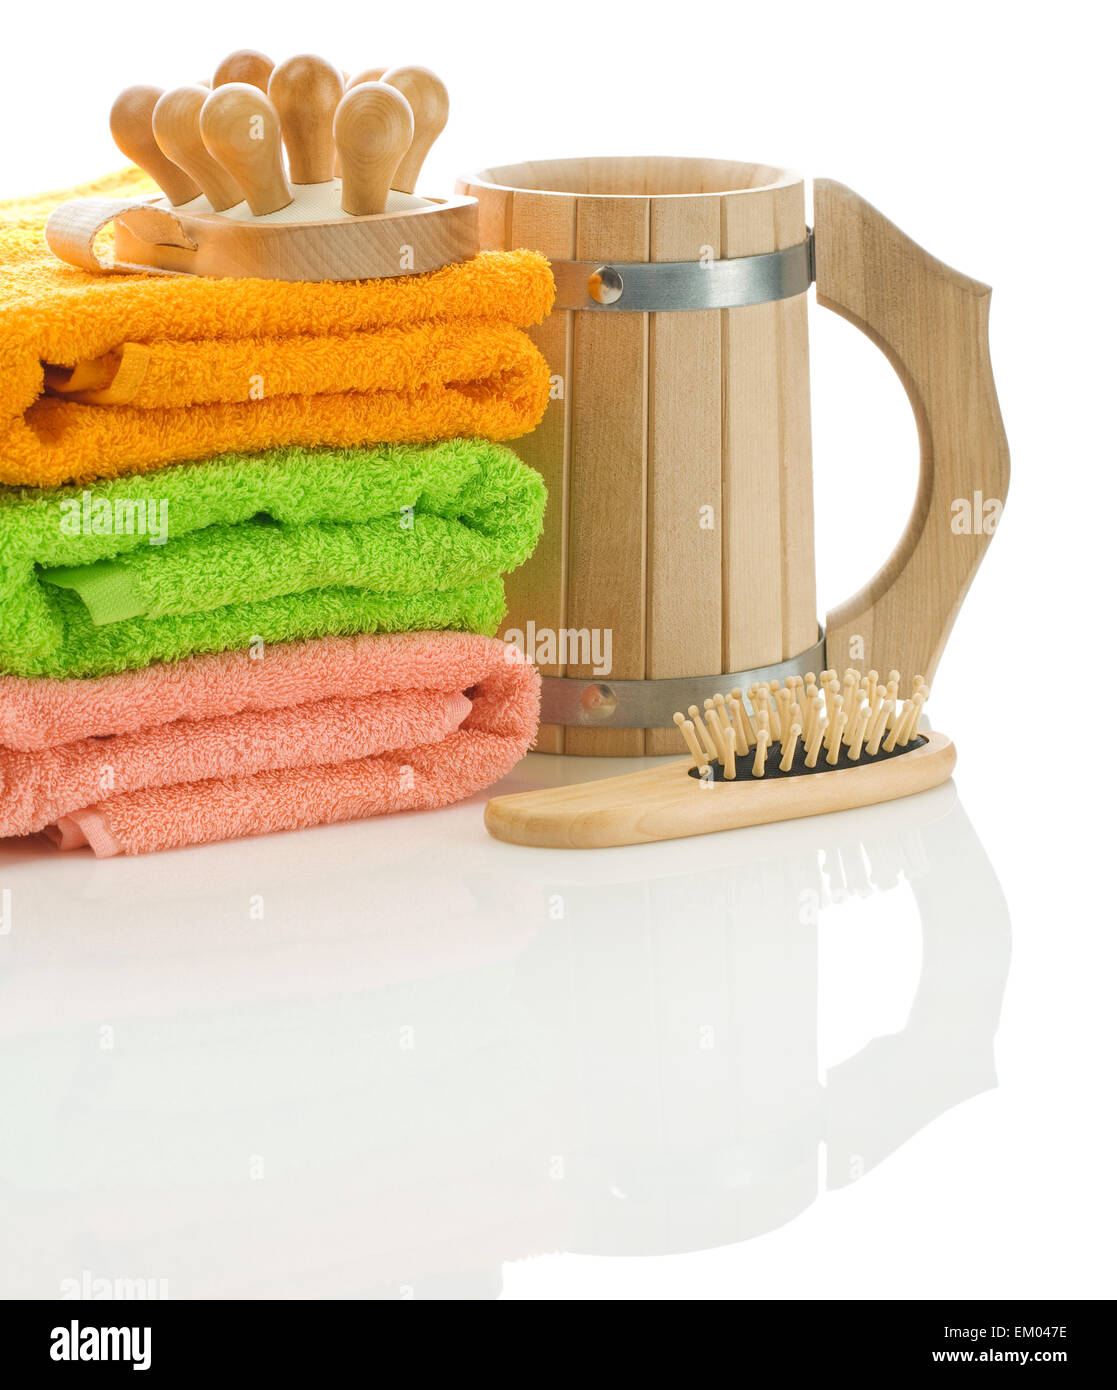 towels with wooden objects Stock Photo